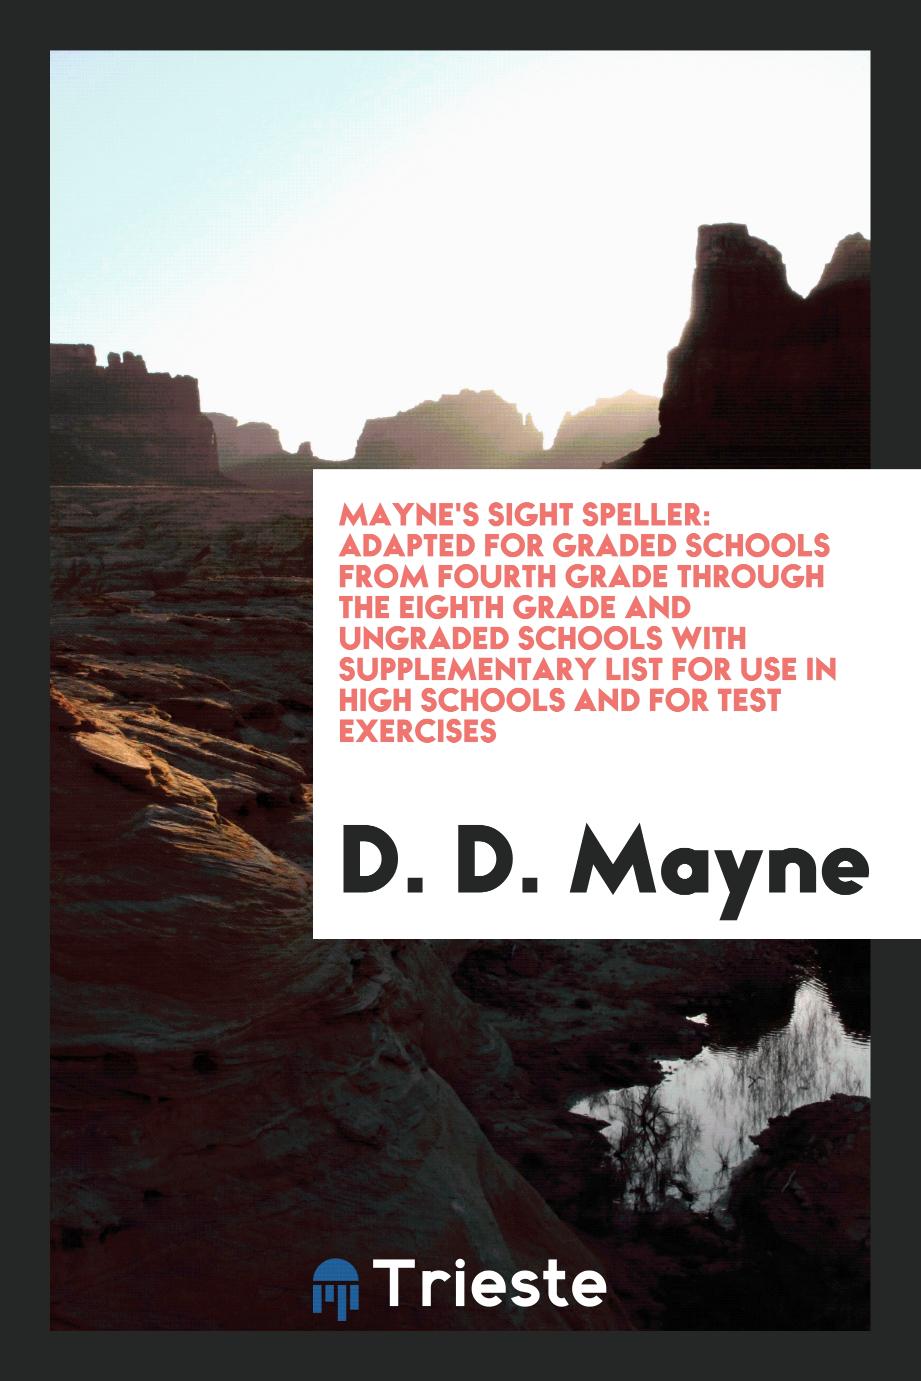 Mayne's Sight Speller: Adapted for Graded Schools from Fourth Grade through the Eighth Grade and Ungraded Schools with Supplementary List for Use in High Schools and for Test Exercises